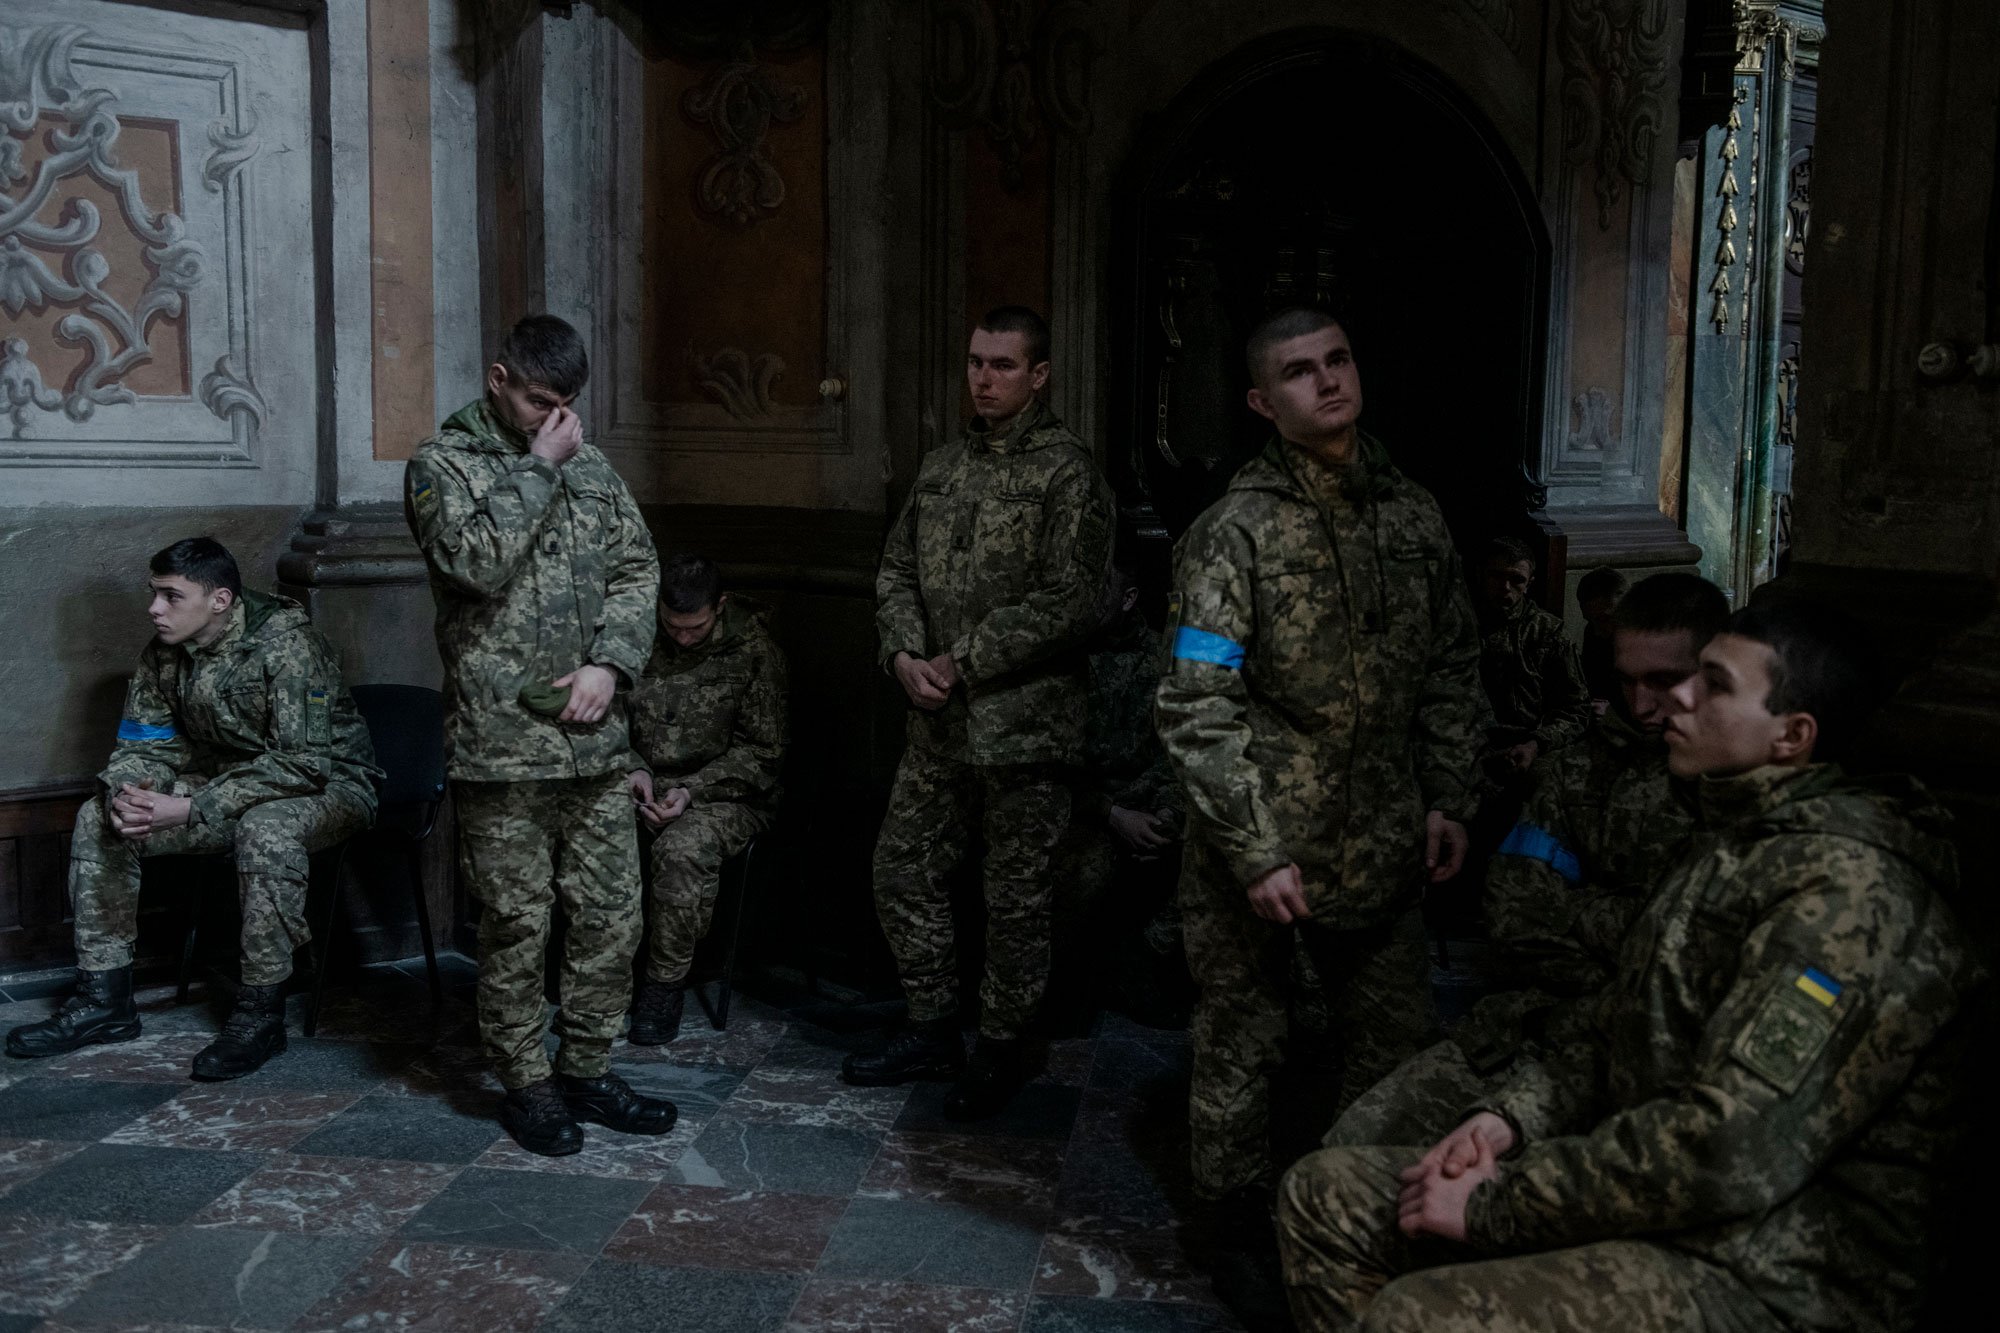  Young military volunteers participate in a memorial service in The Cathedral of Most Holy Apostles Peter and Paul in Lviv, Ukraine, March 15, 2022, for victims killed during Russian airstrikes two days earlier at the military base in Yavoriv. 